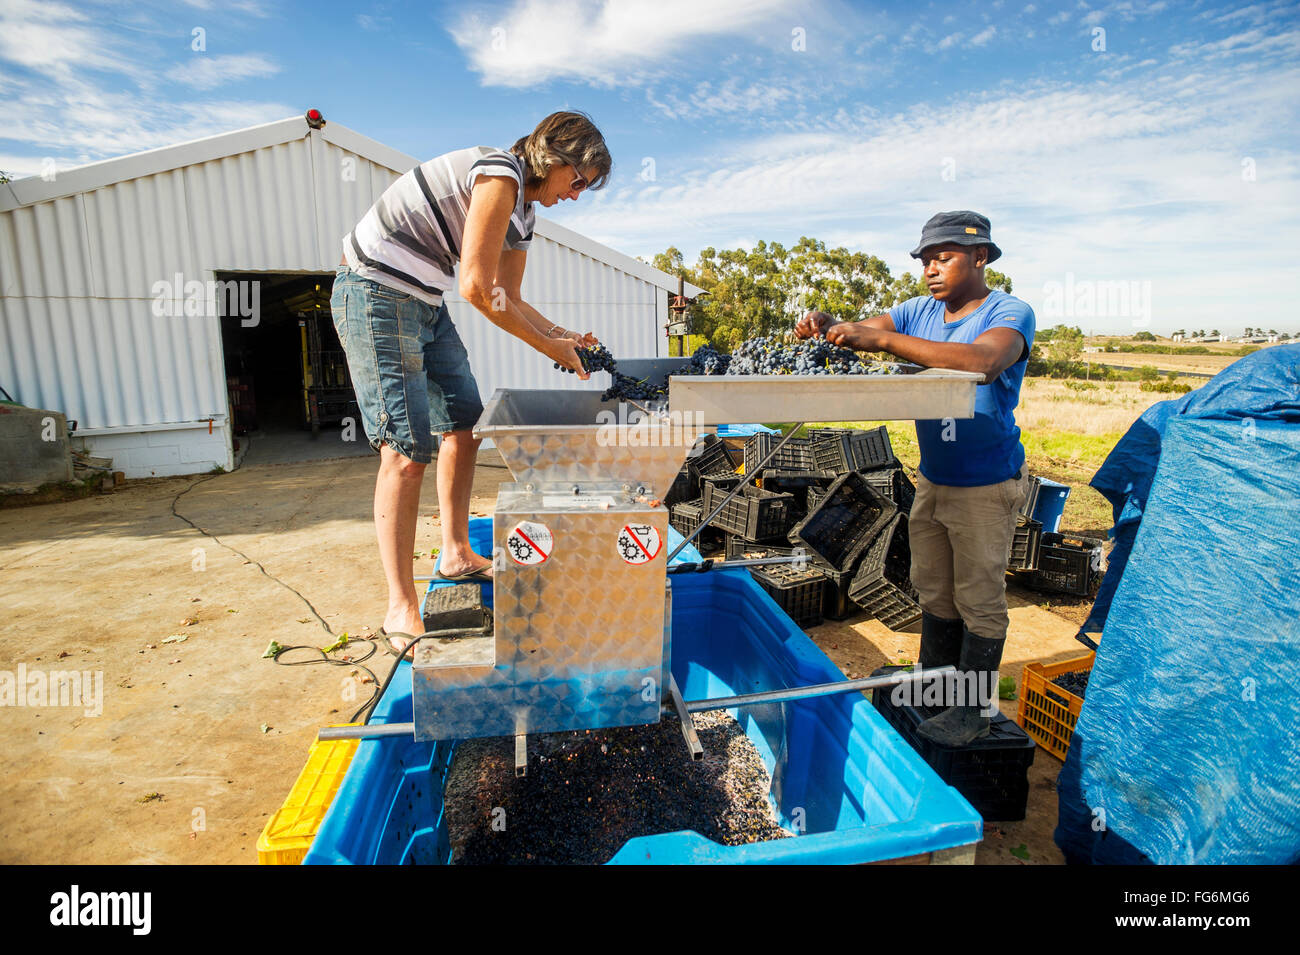 Wine makers mashing wine grapes; Paarl, Western Cape, South Africa Stock Photo